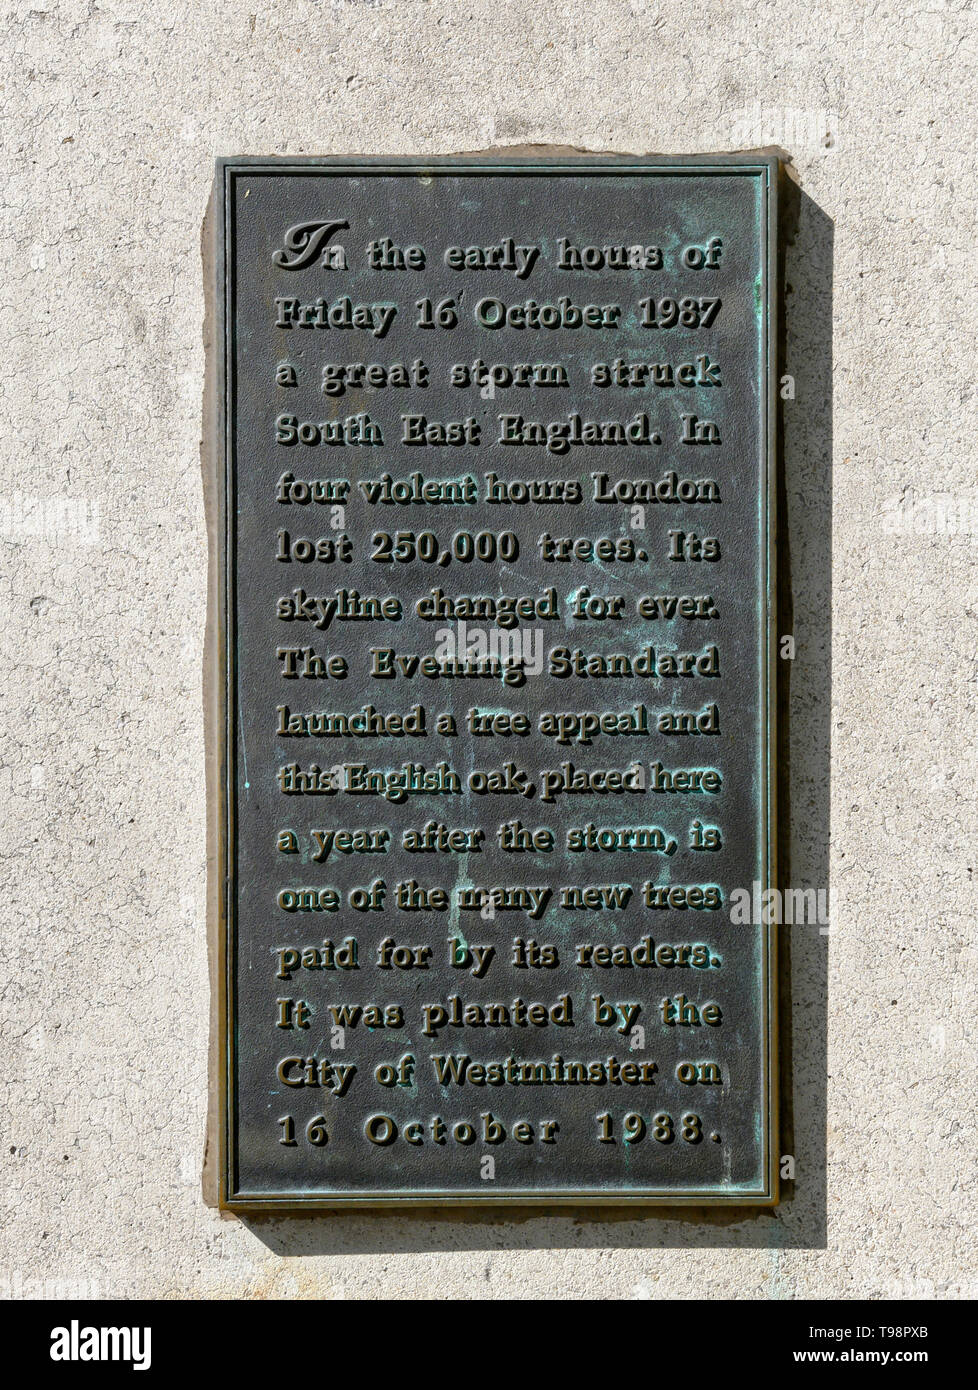 Commemorative plaque at Charing Cross, London, describing the great storm of October 1987 which struck southeast England destrying thousands of trees. Stock Photo